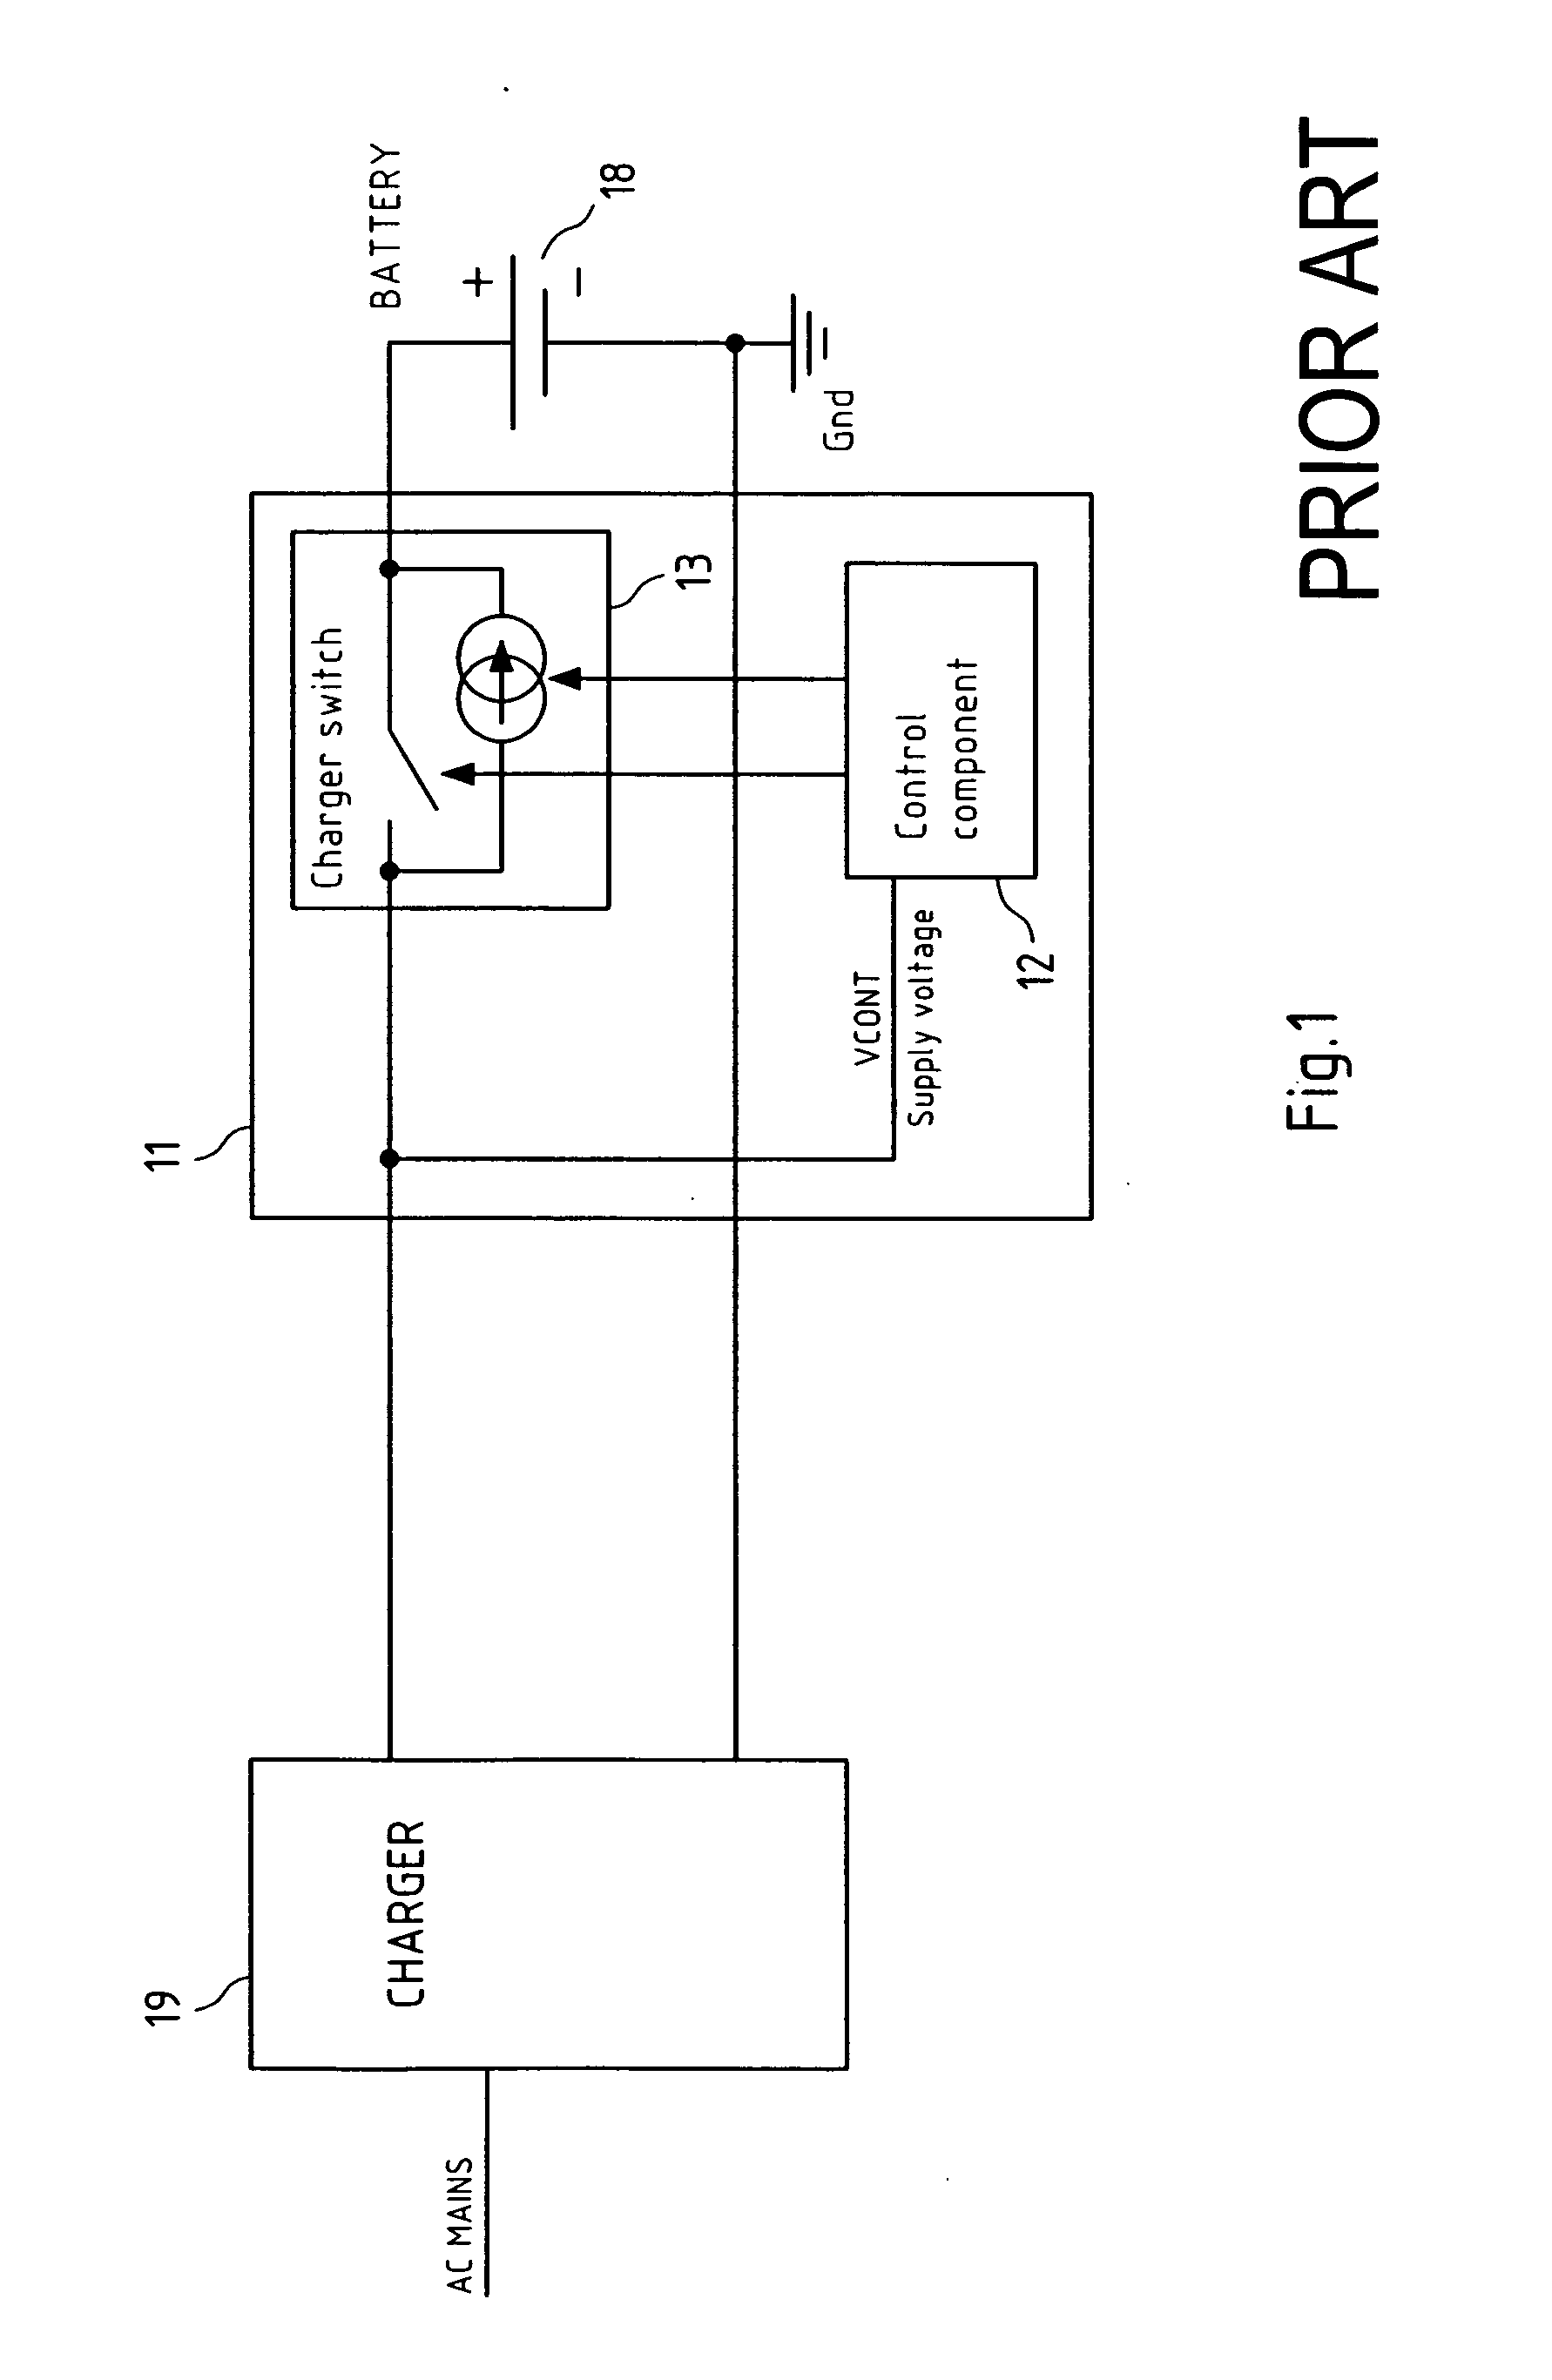 Battery charging control